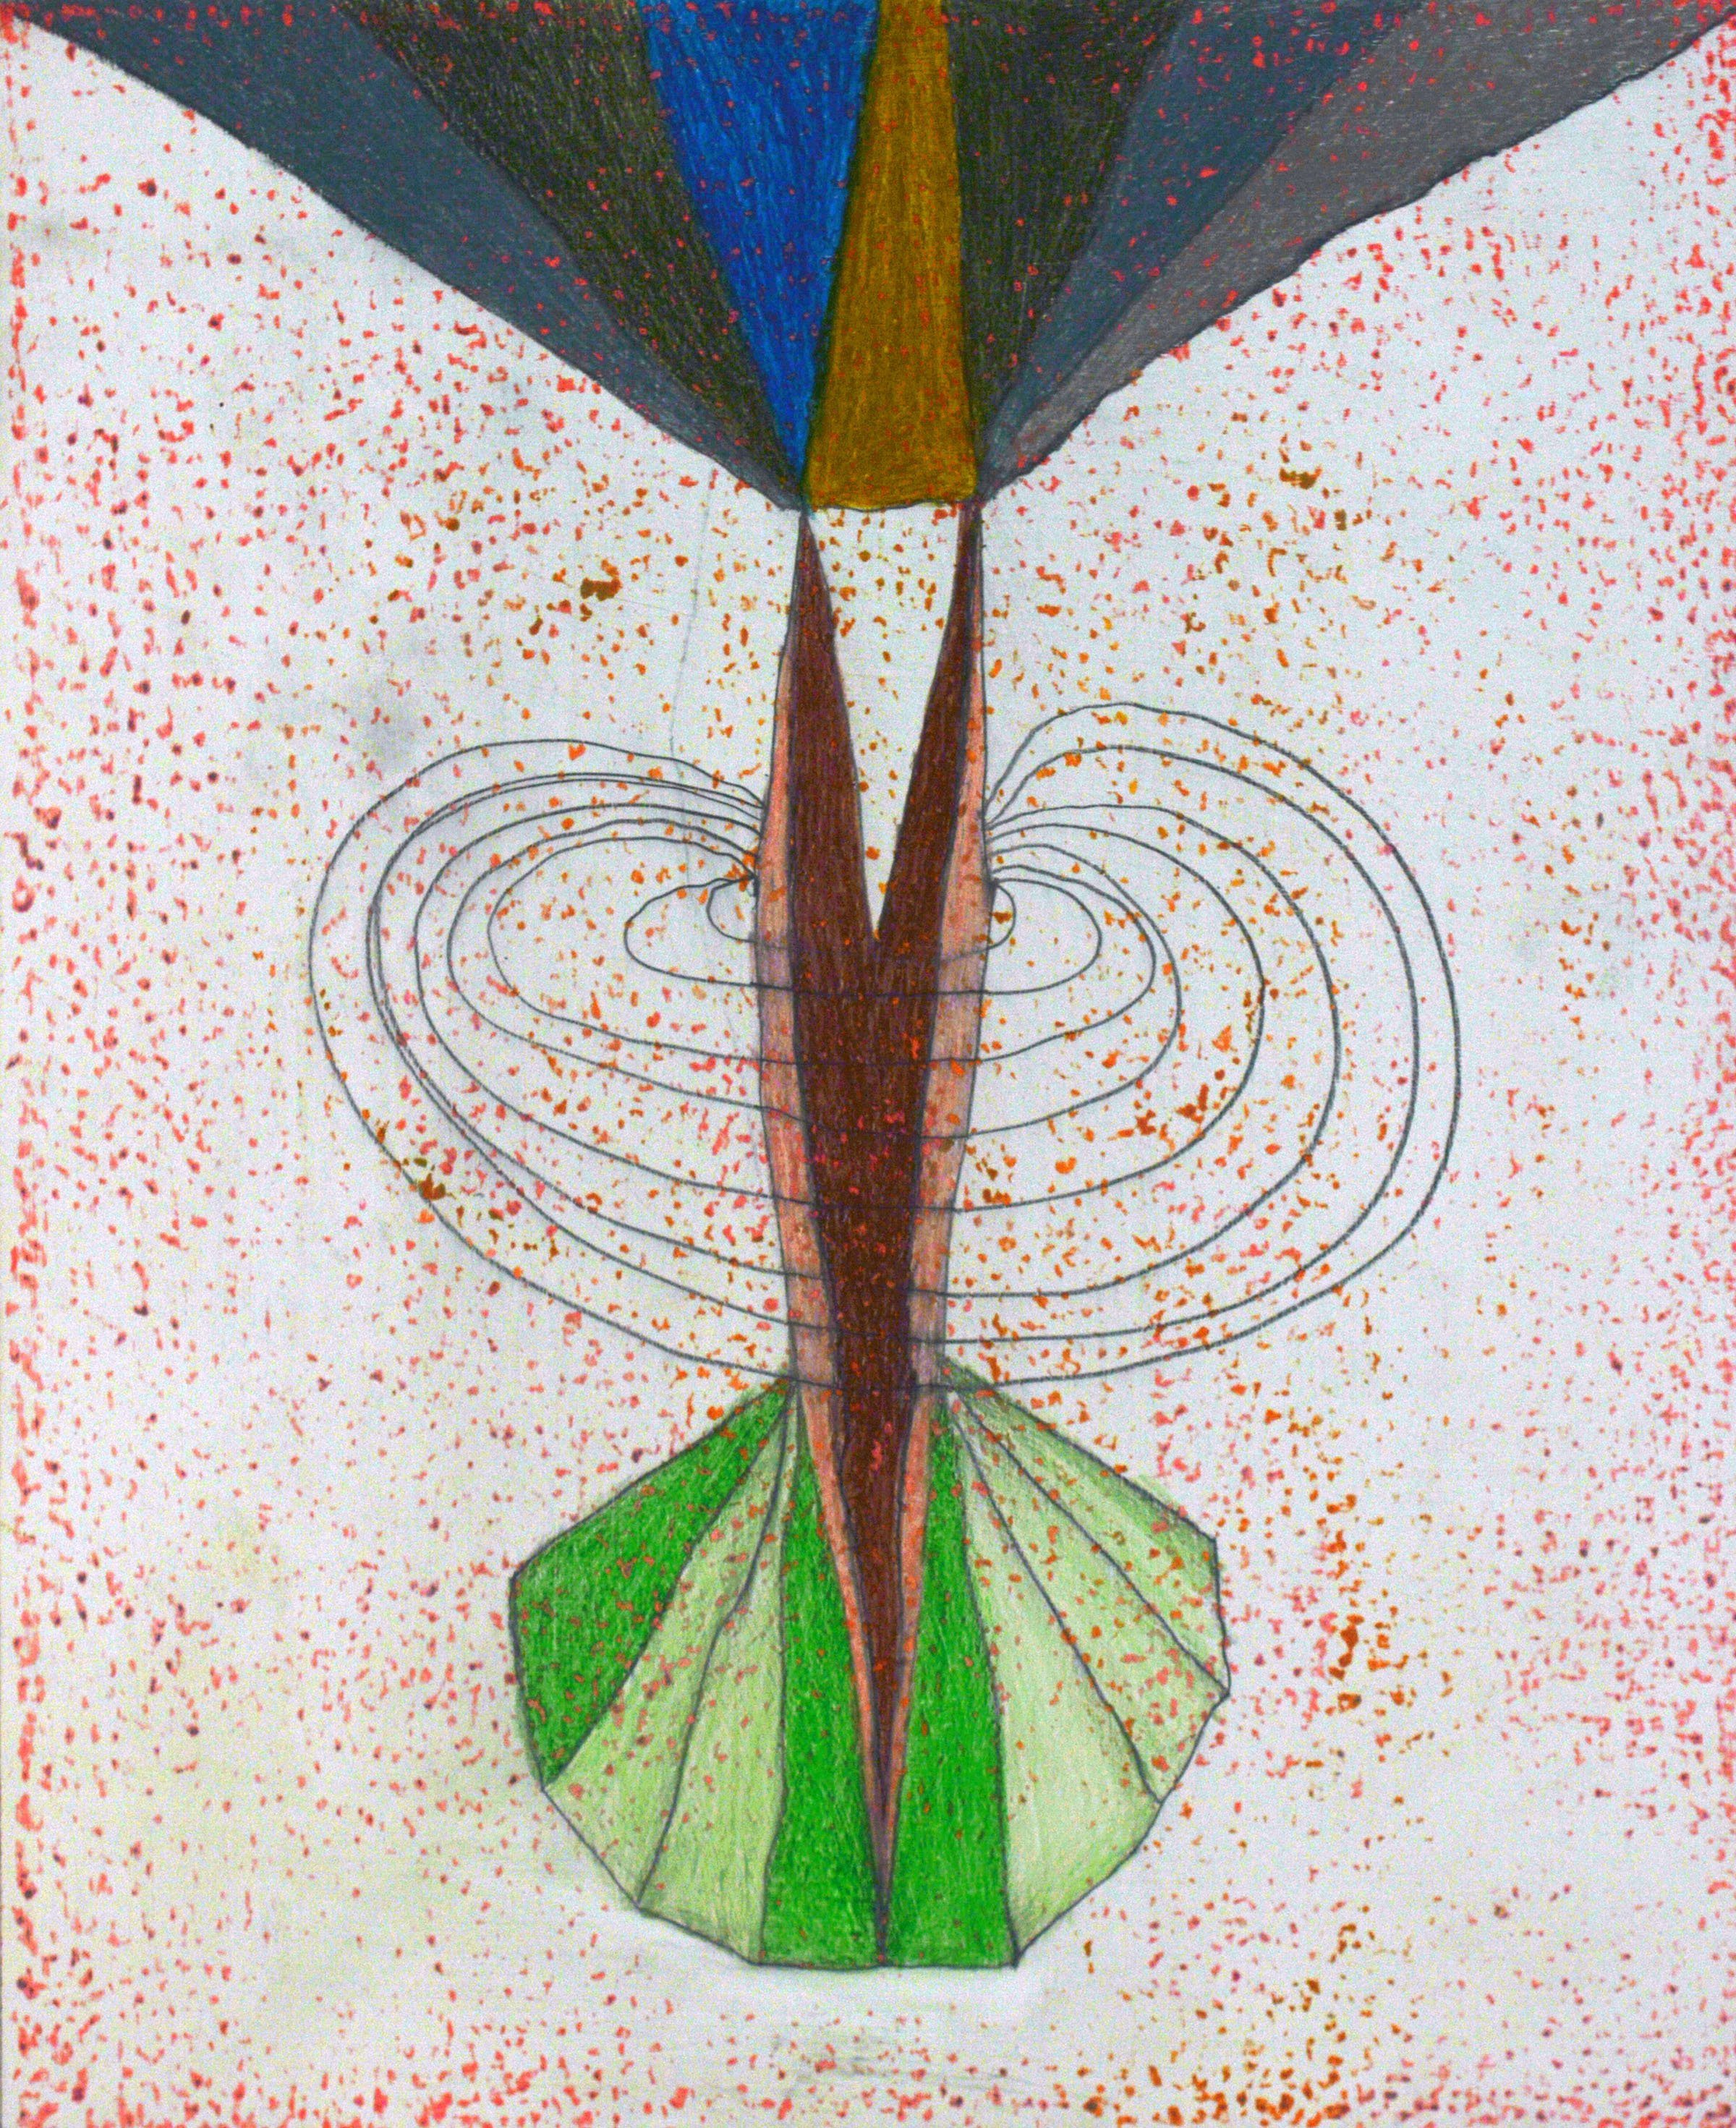  Catch and Skin, 2020  oil, pencil, and colored pencil on panel, 16 x 13 inches  (40.64 x 7.62 cm) 